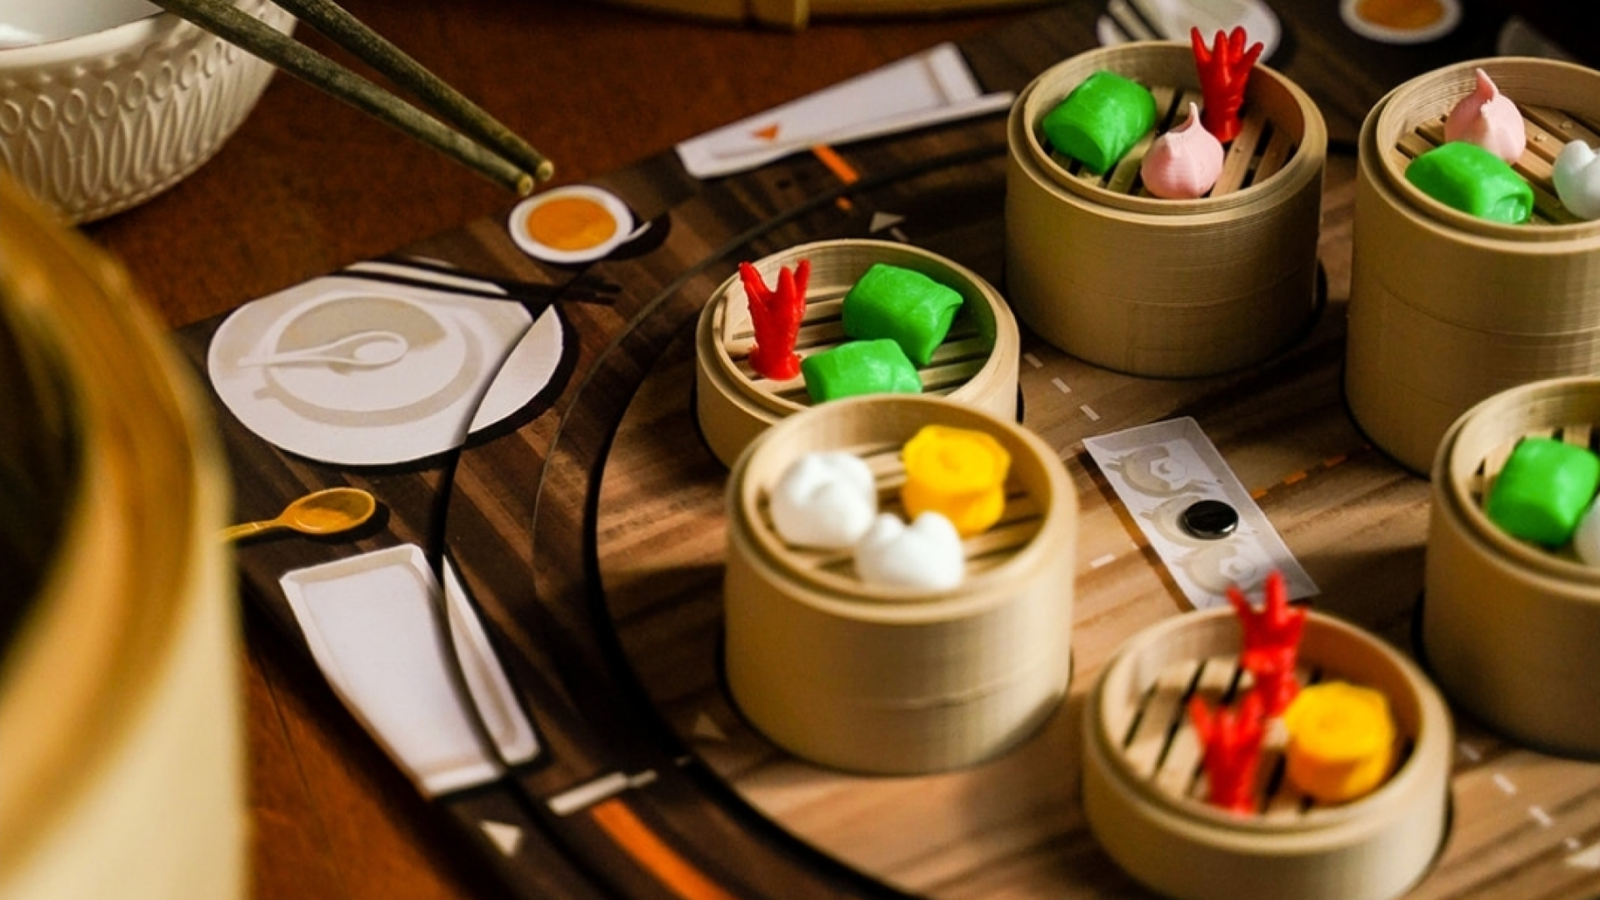 Steam Up: A Feast of Dim Sum - How to play board game (Official Video) 